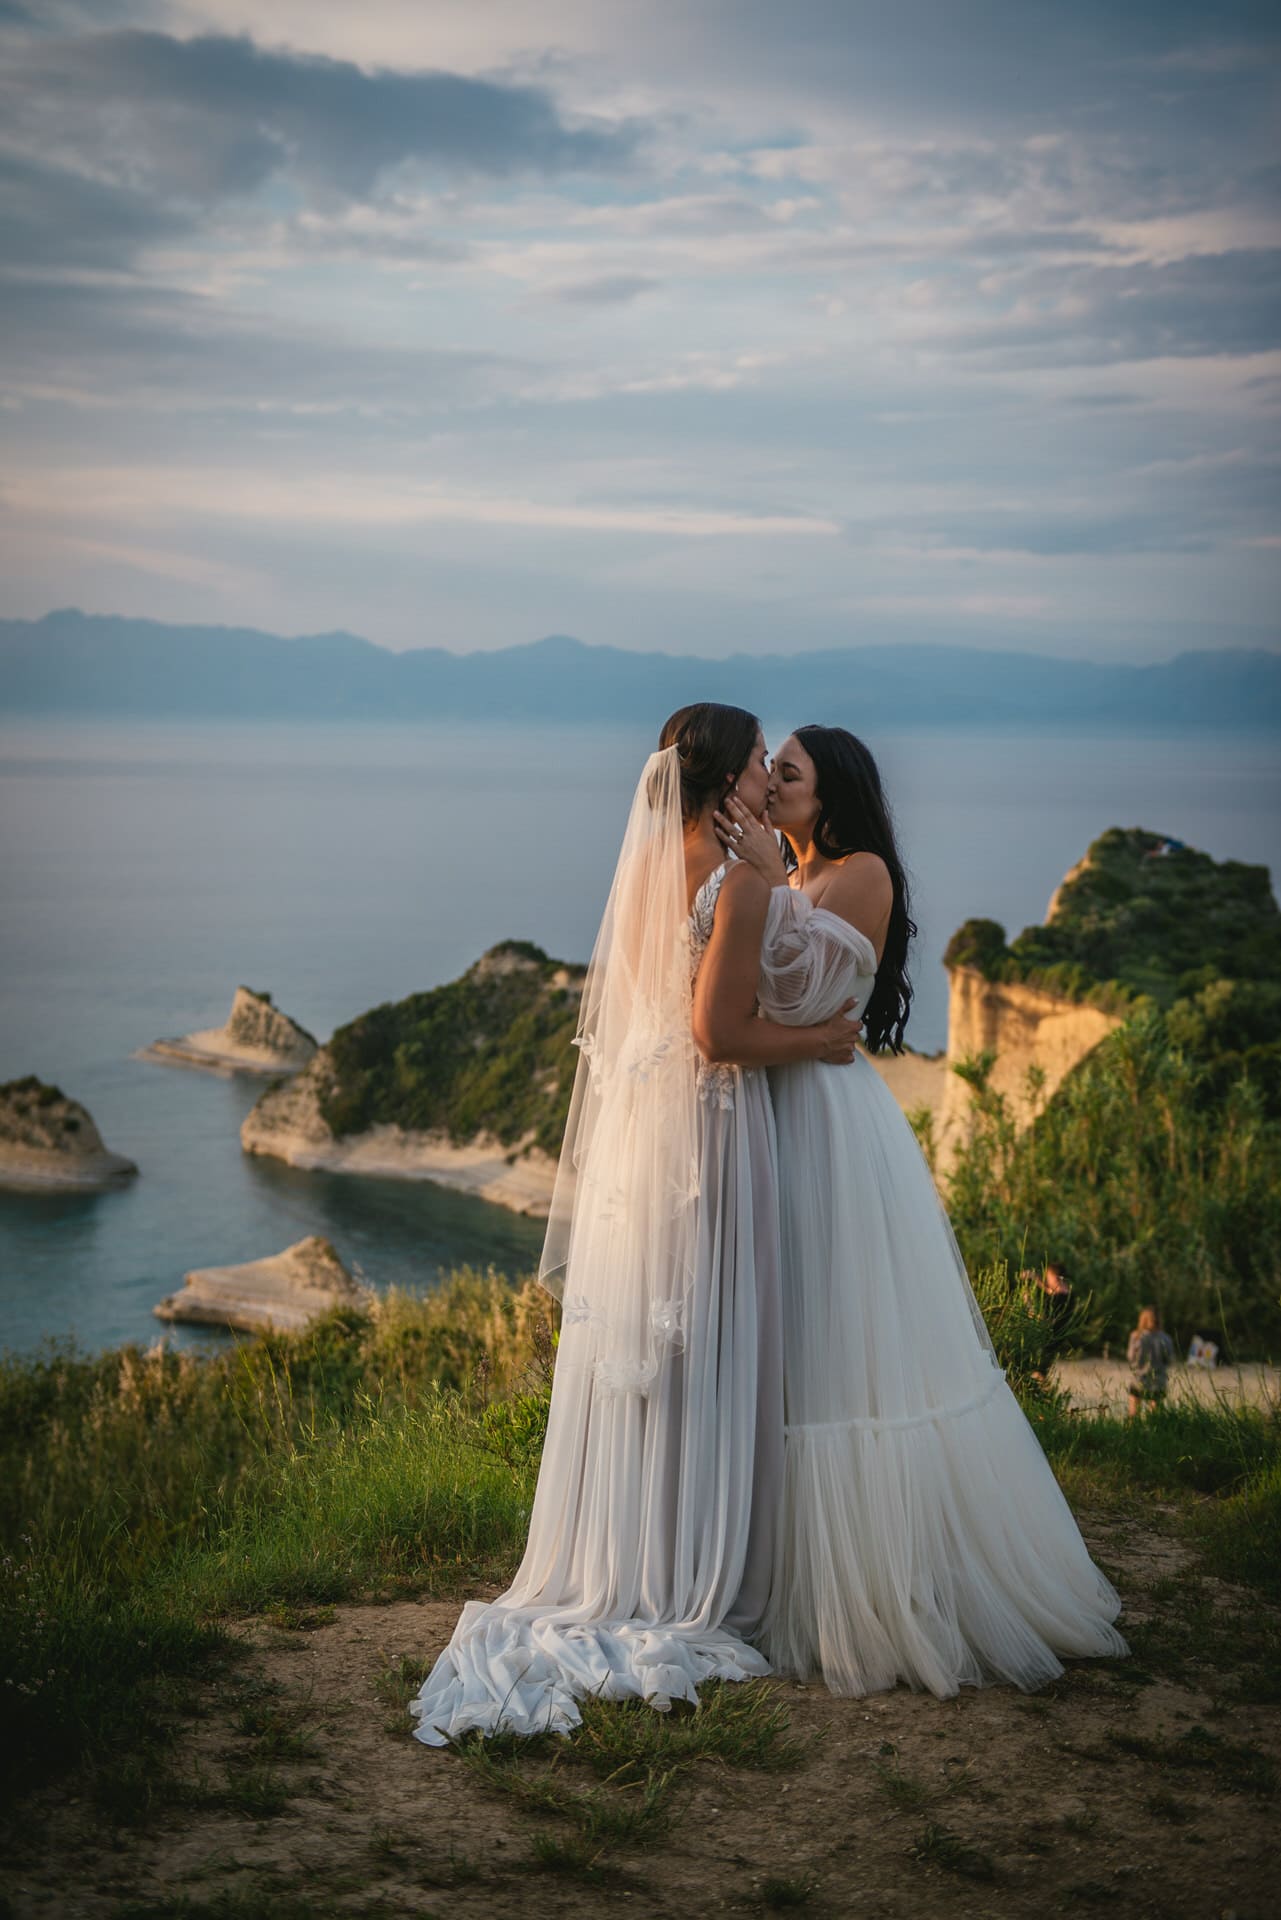 A snapshot of promises exchanged in the presence of loved ones at their Corfu elopement.